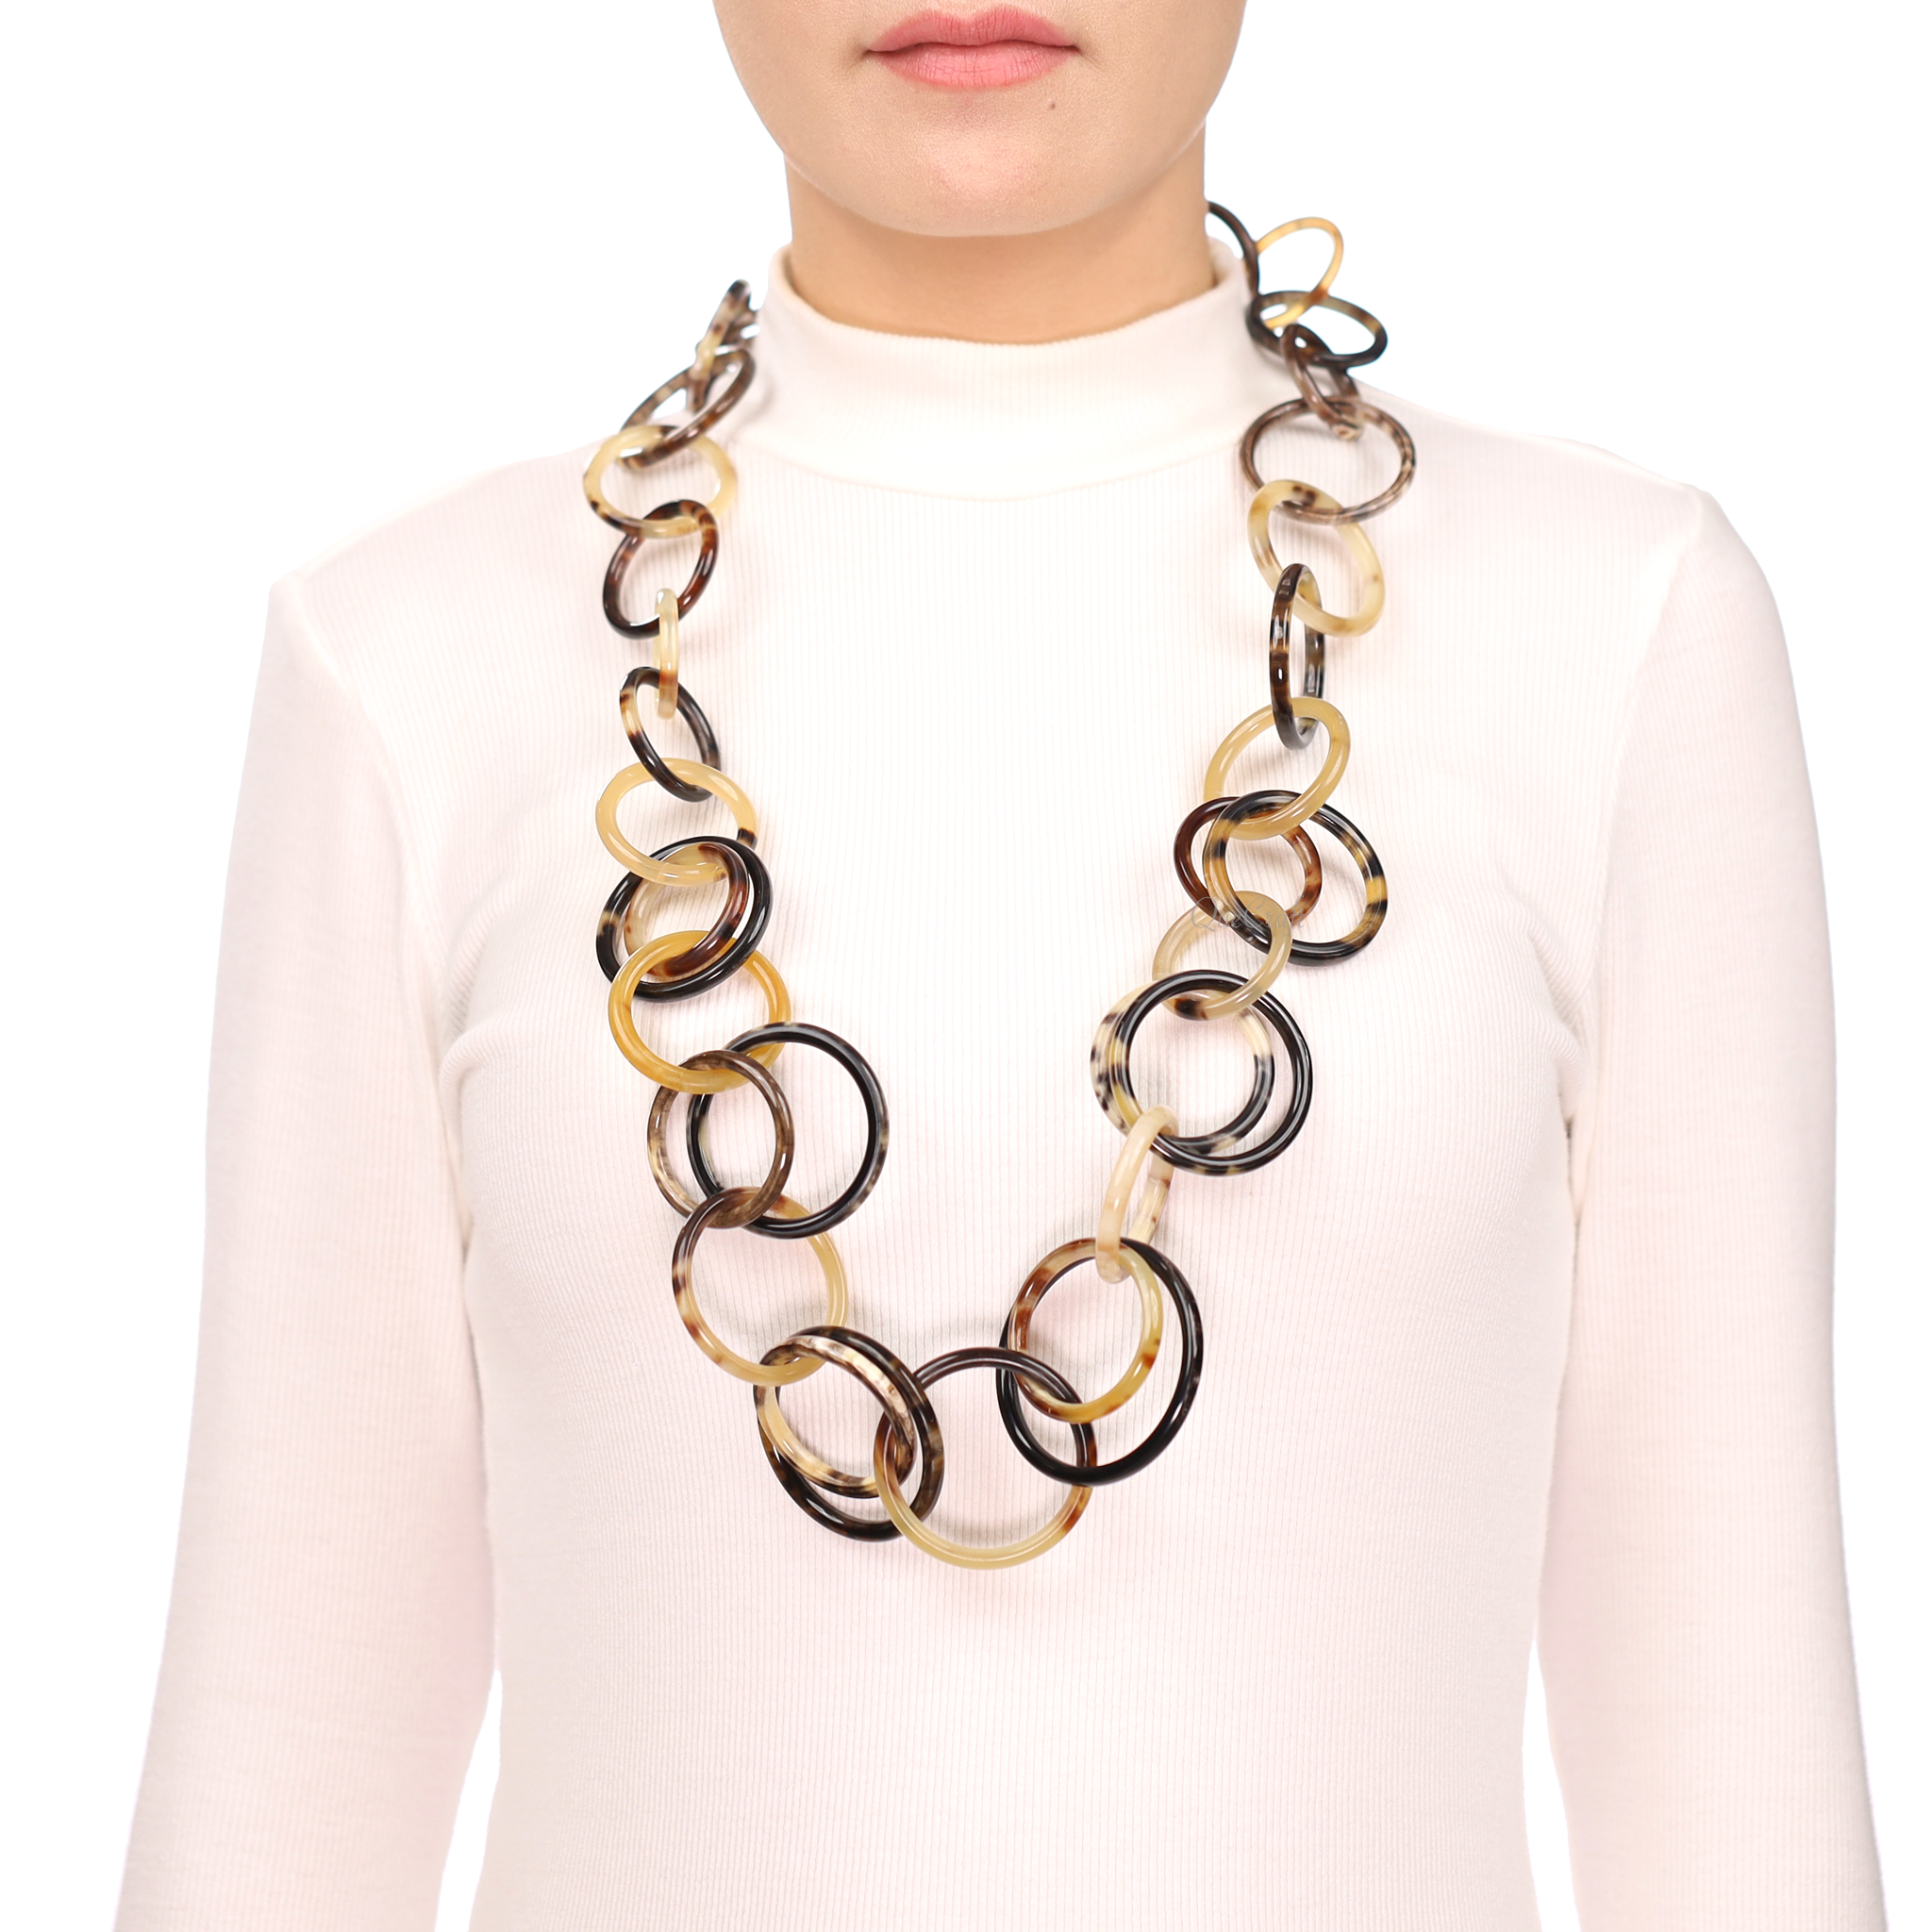 Horn Chain Necklace #13647 - HORN JEWELRY